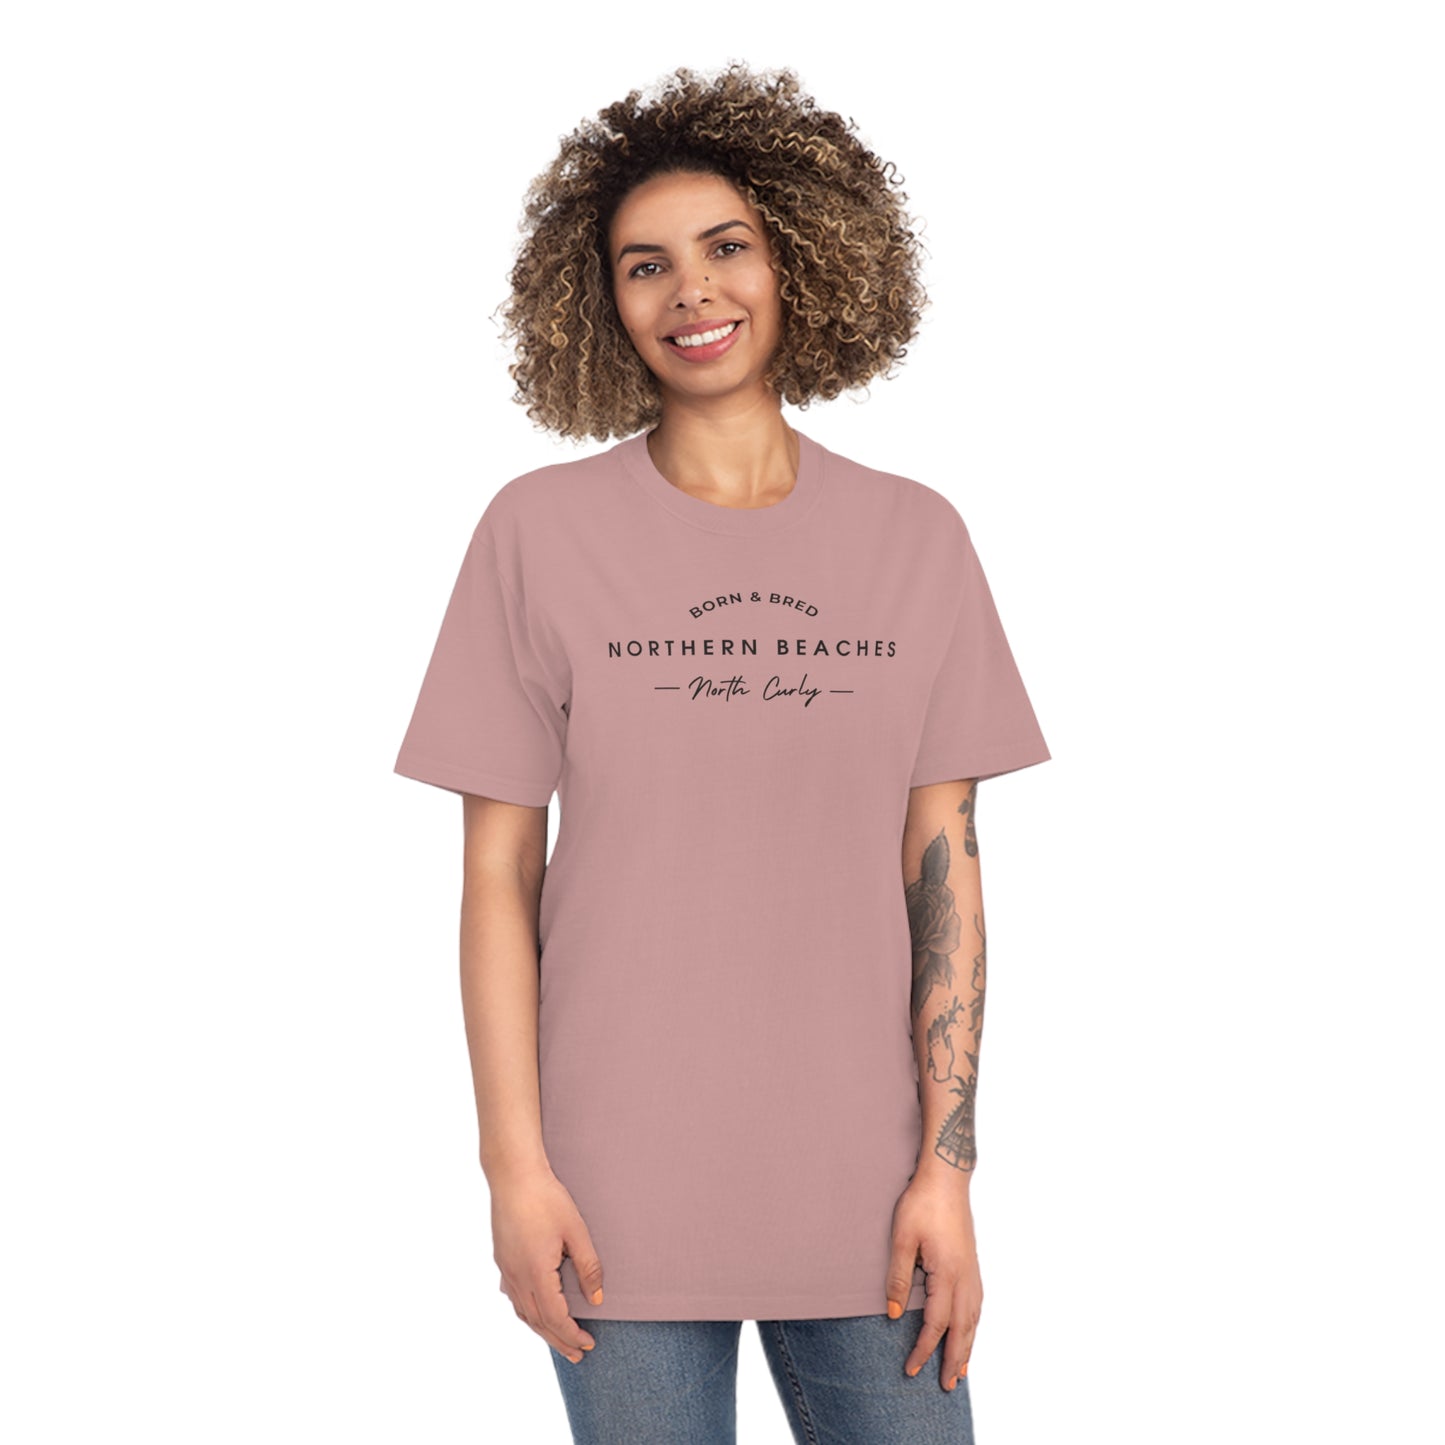 Northern Beaches Nth Curly bnb AS Colour 100% Cotton Unisex Faded Shirt